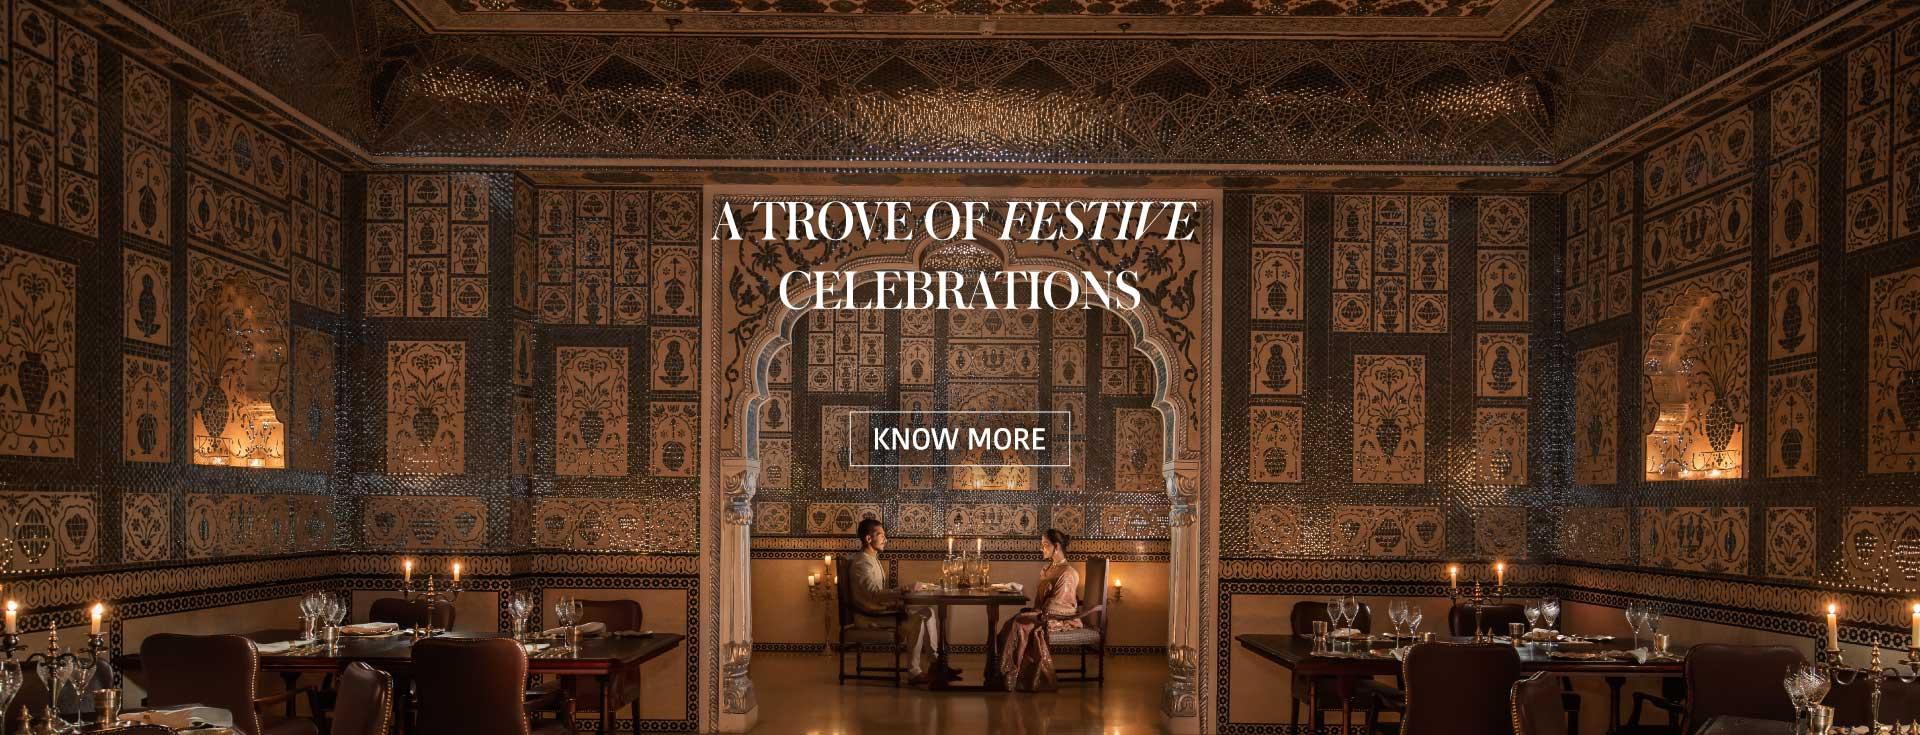 Festive Delight - The Leela Palaces, Hotels and Resorts